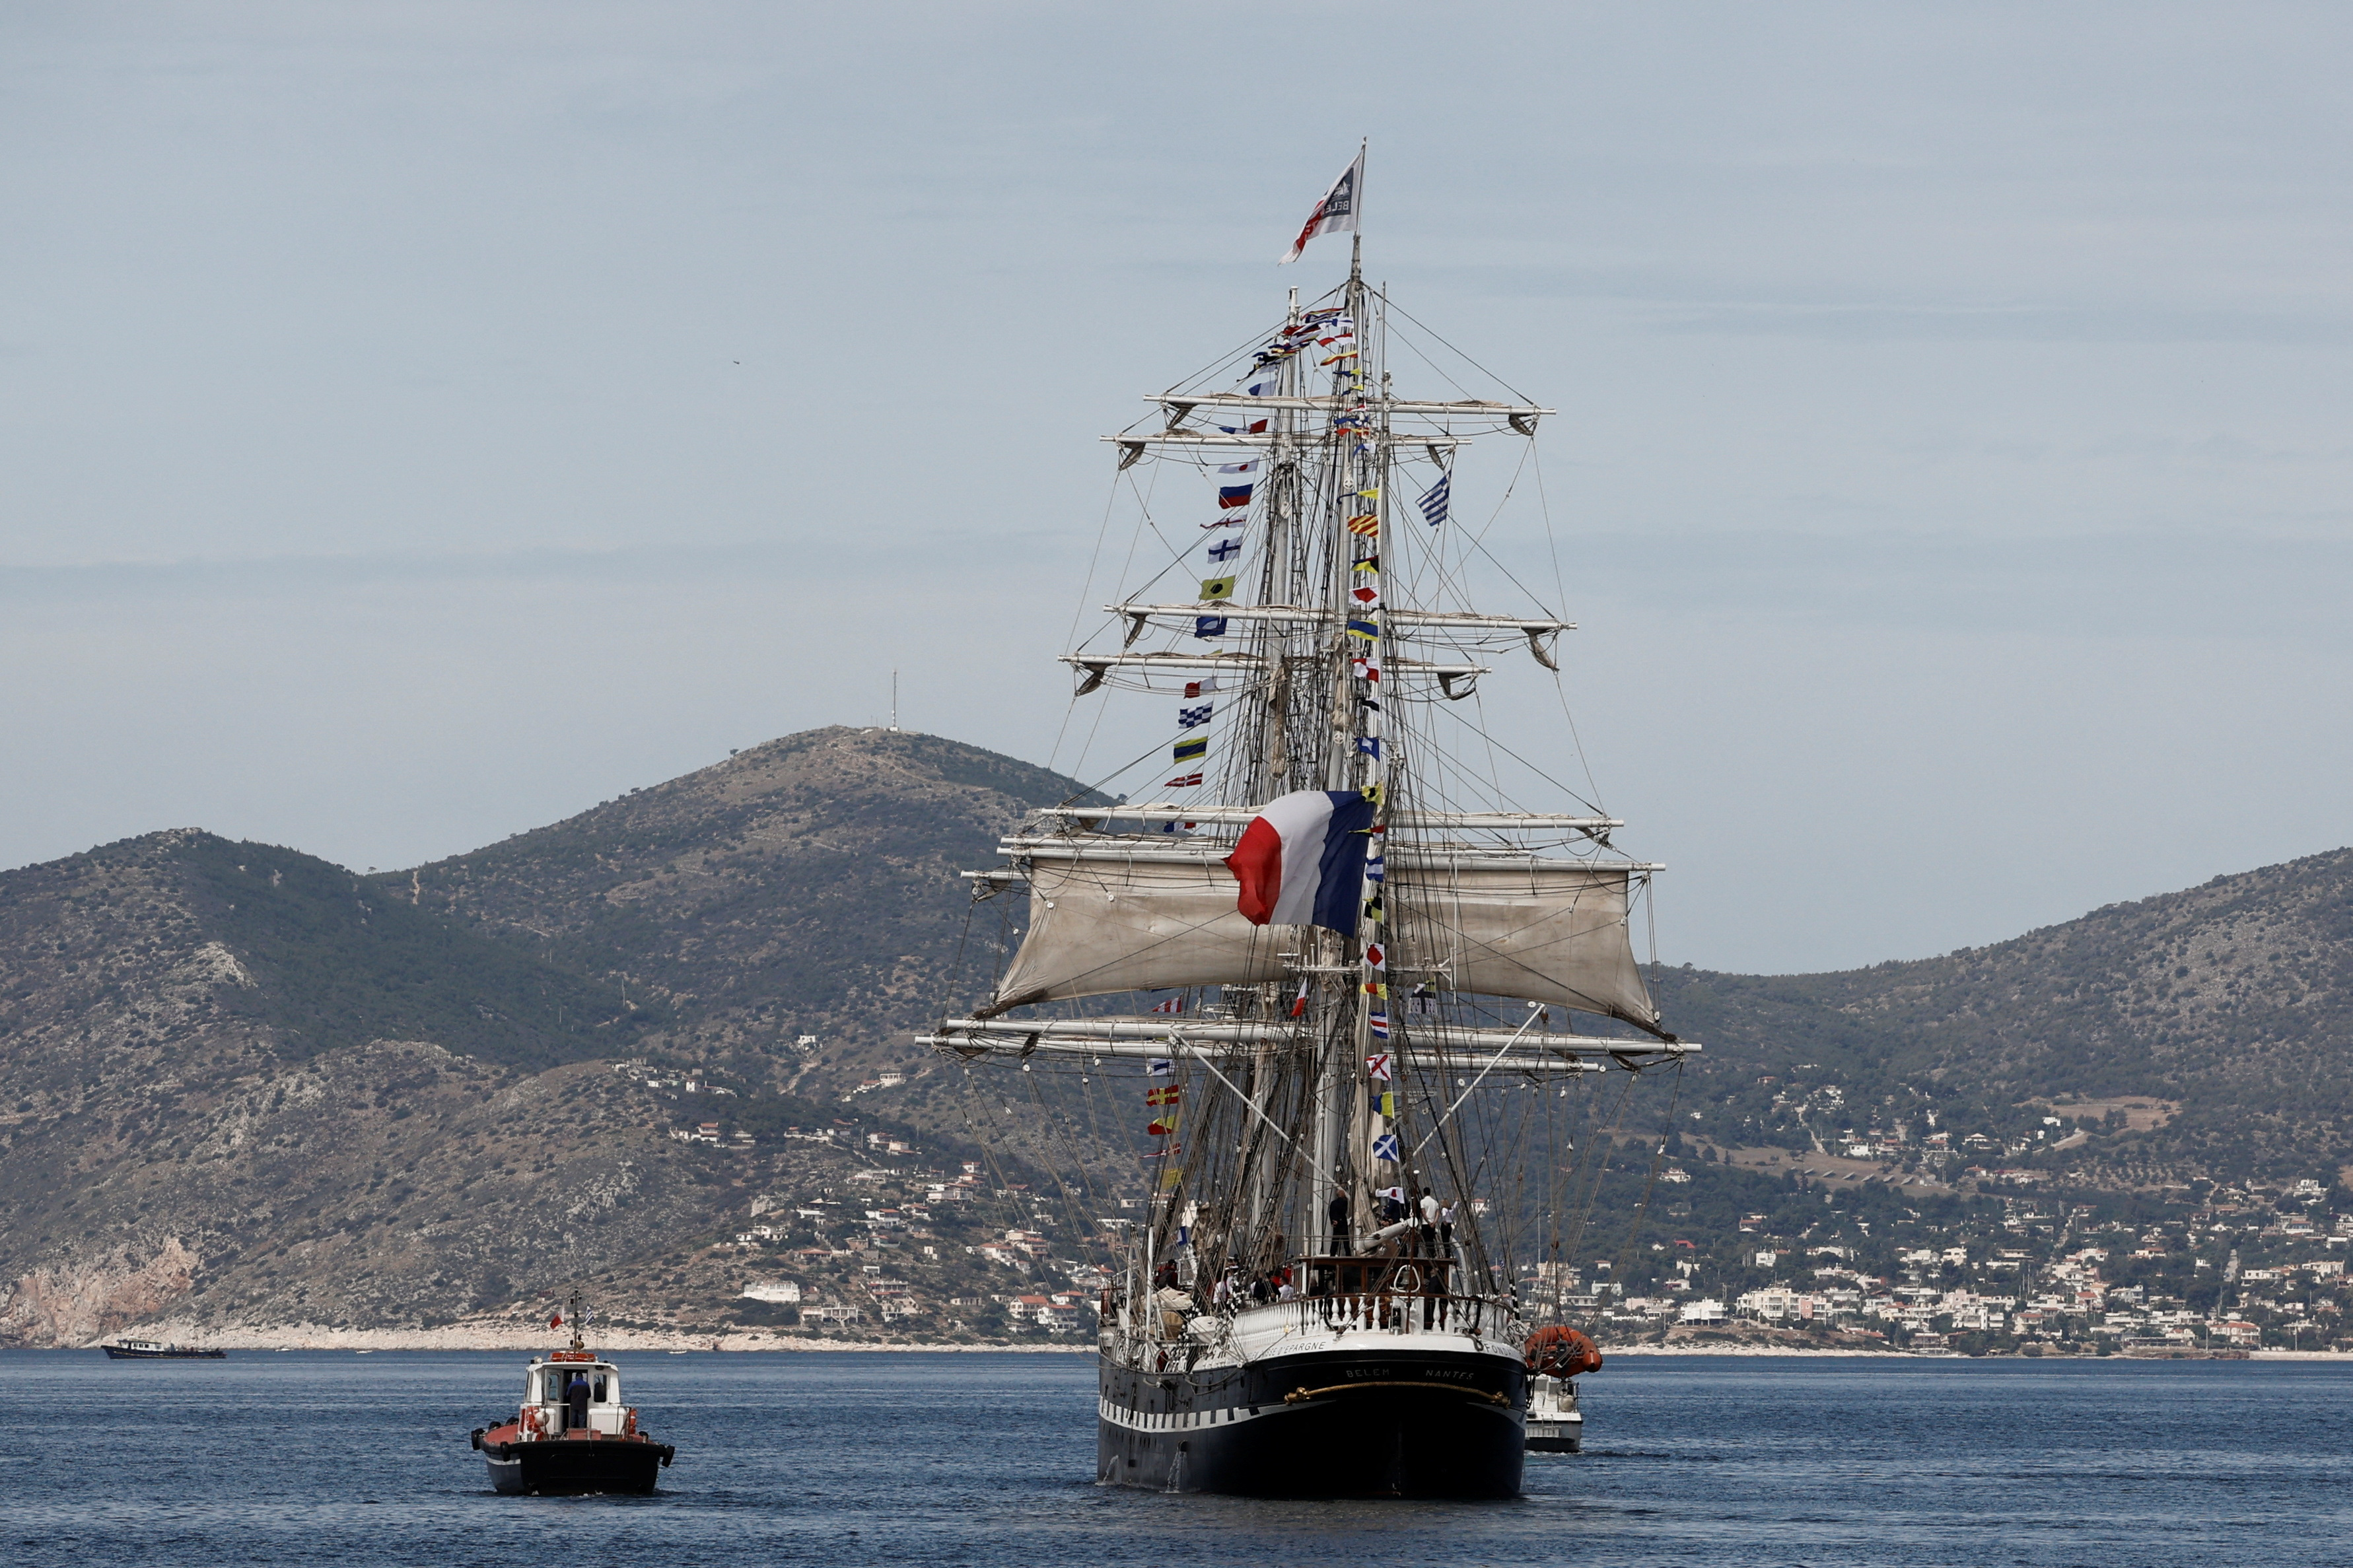 The Olympic flame departs Greece on the sailing ship Belem for the 2024 Paris Games